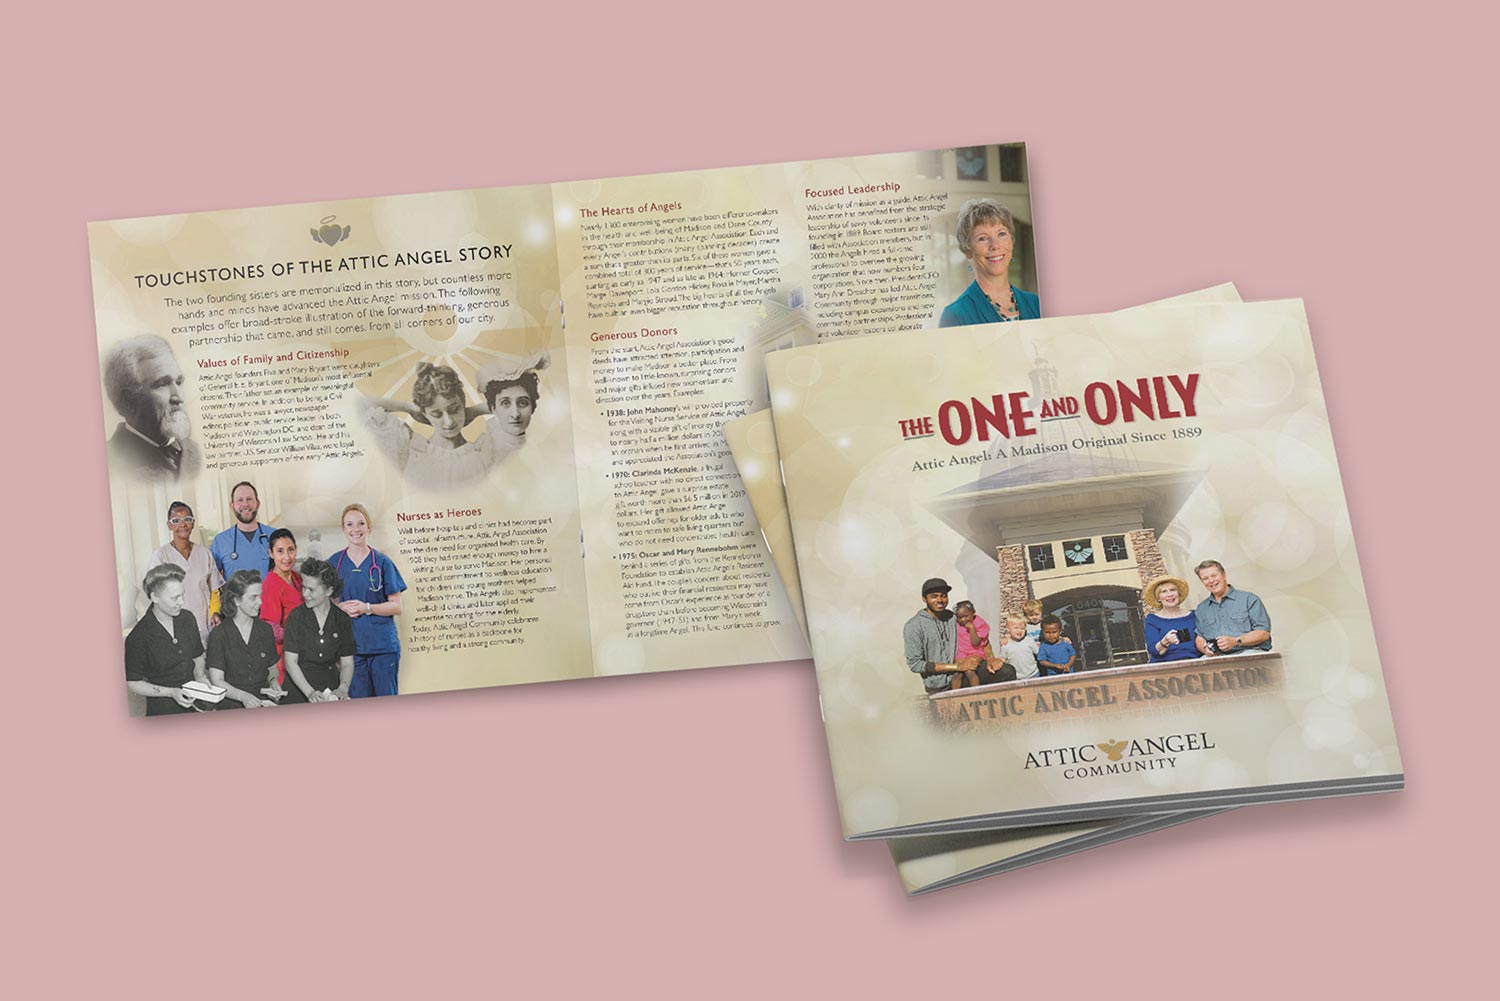 Spread of "The One and Only" book for Attic Angel Community